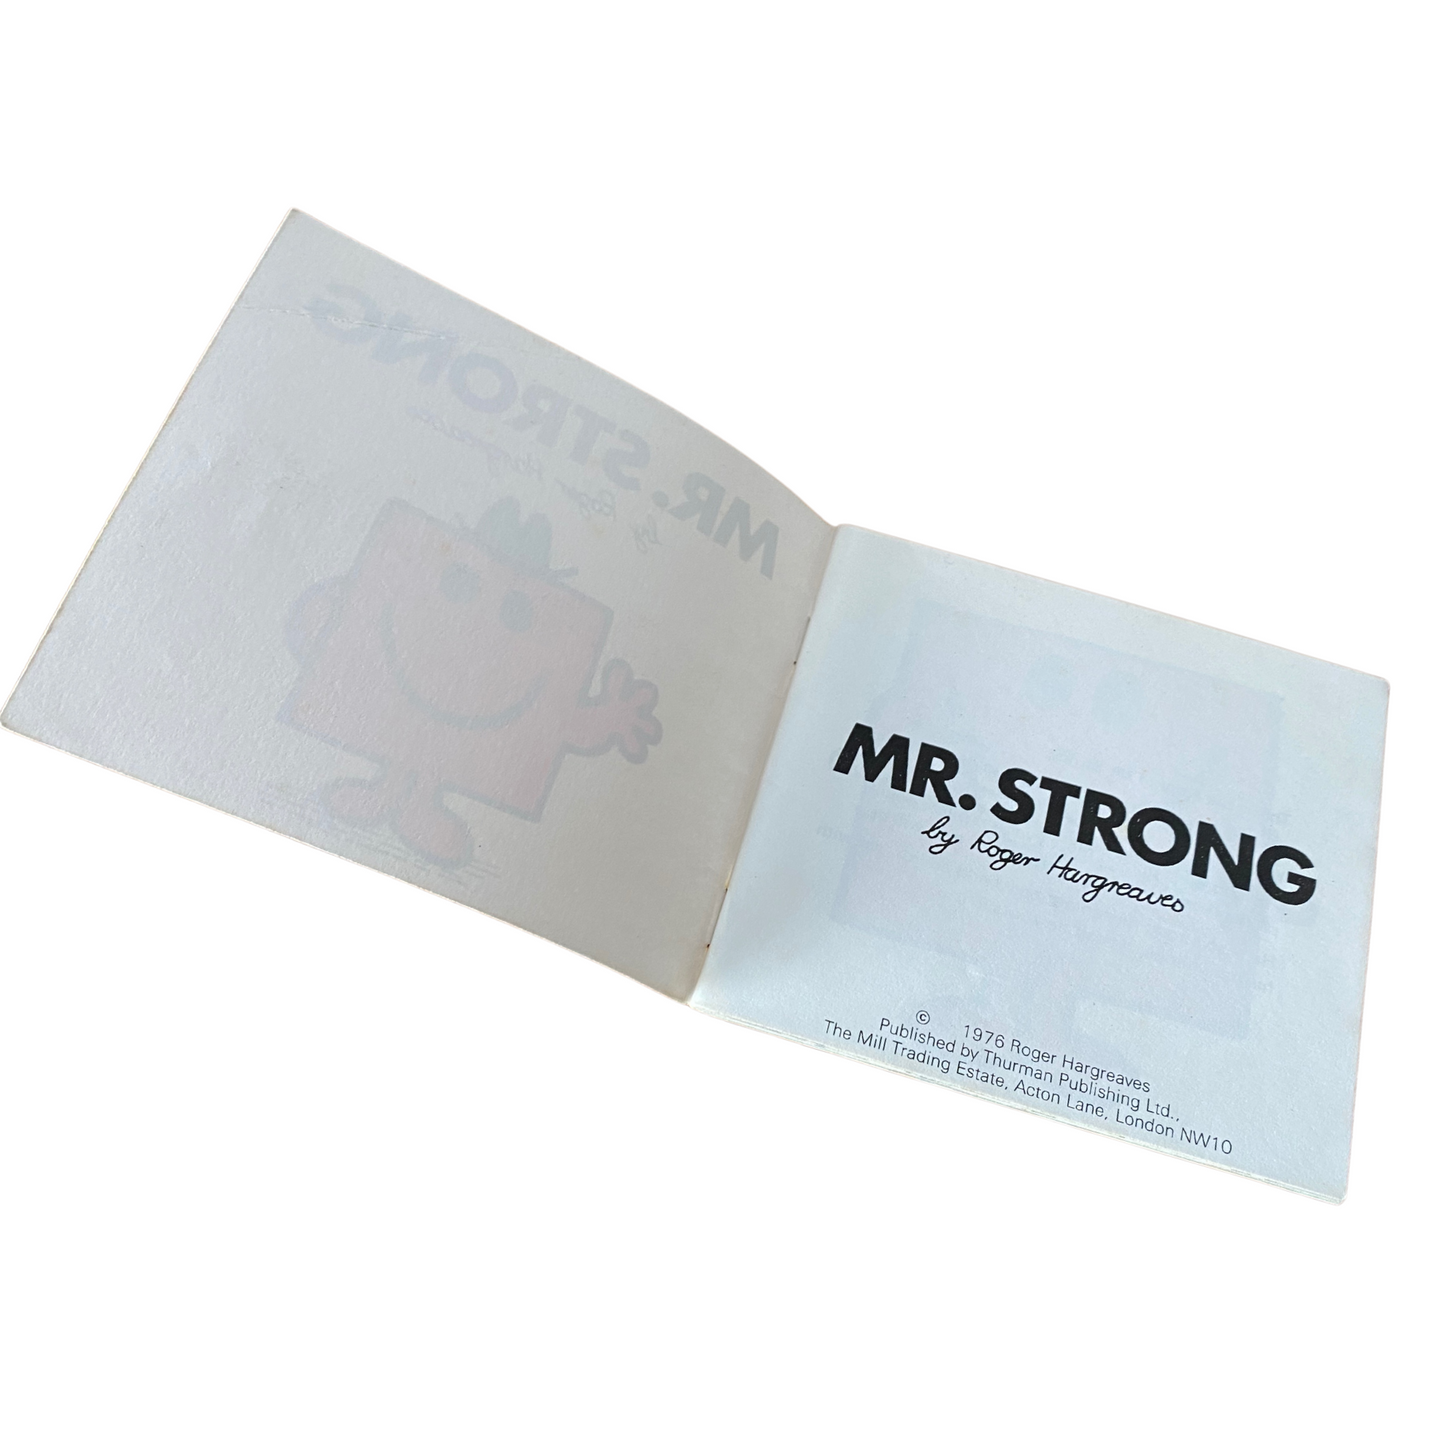 Classic Mr. Men Book -   Mr Strong  - 1970s Edition